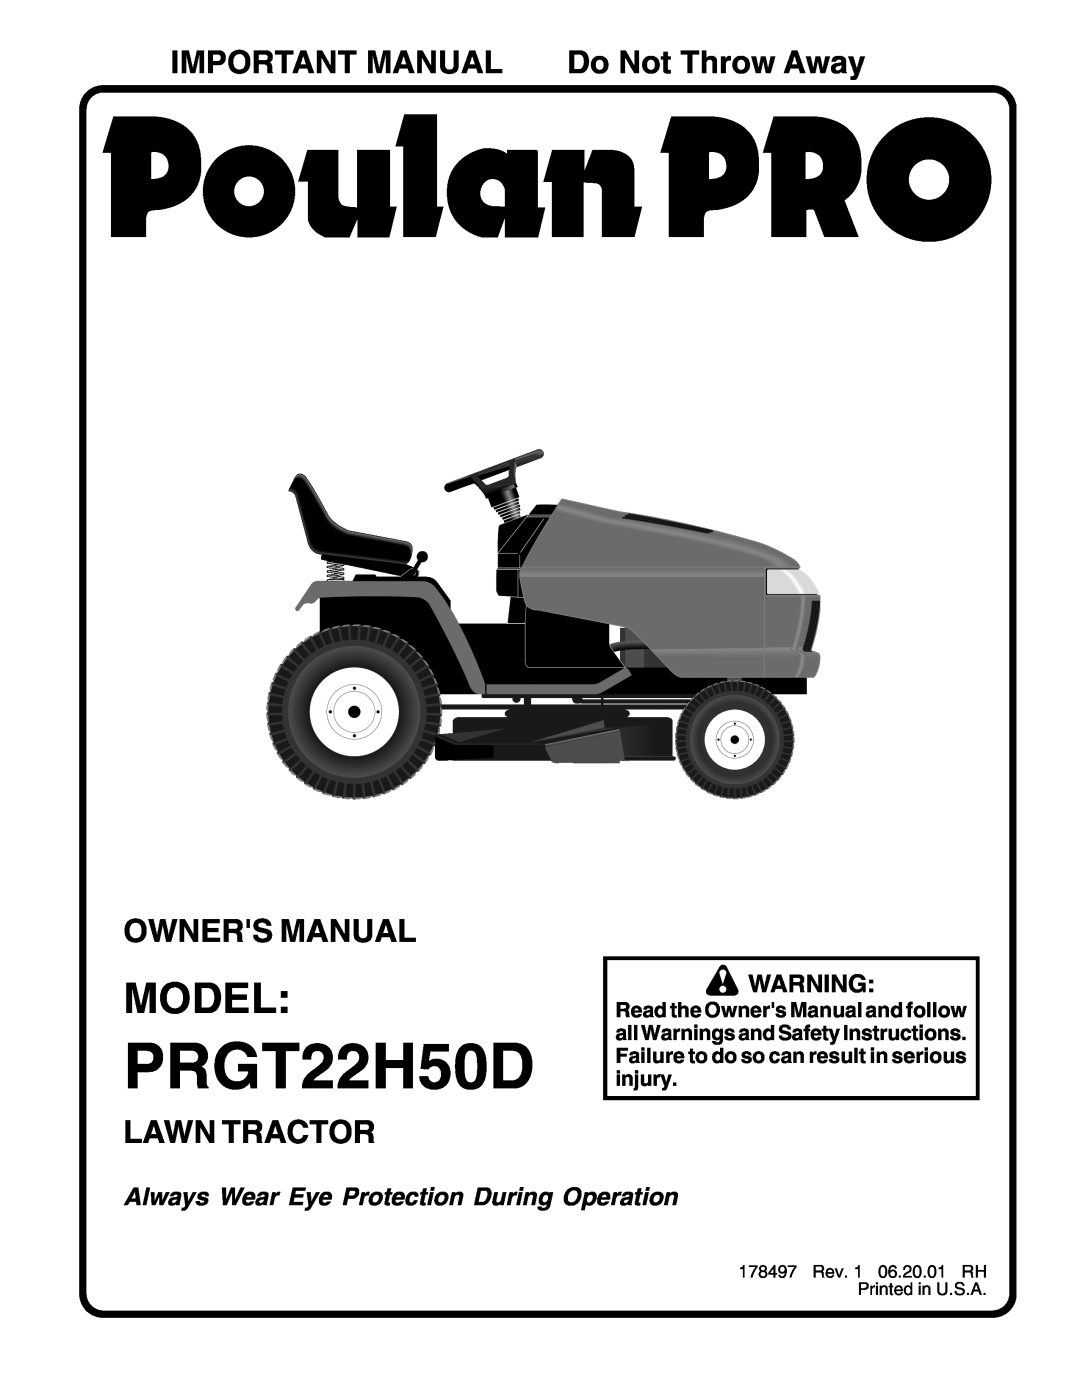 Poulan PRGT22H50D owner manual Model, IMPORTANT MANUAL Do Not Throw Away, Owners Manual, Lawn Tractor 